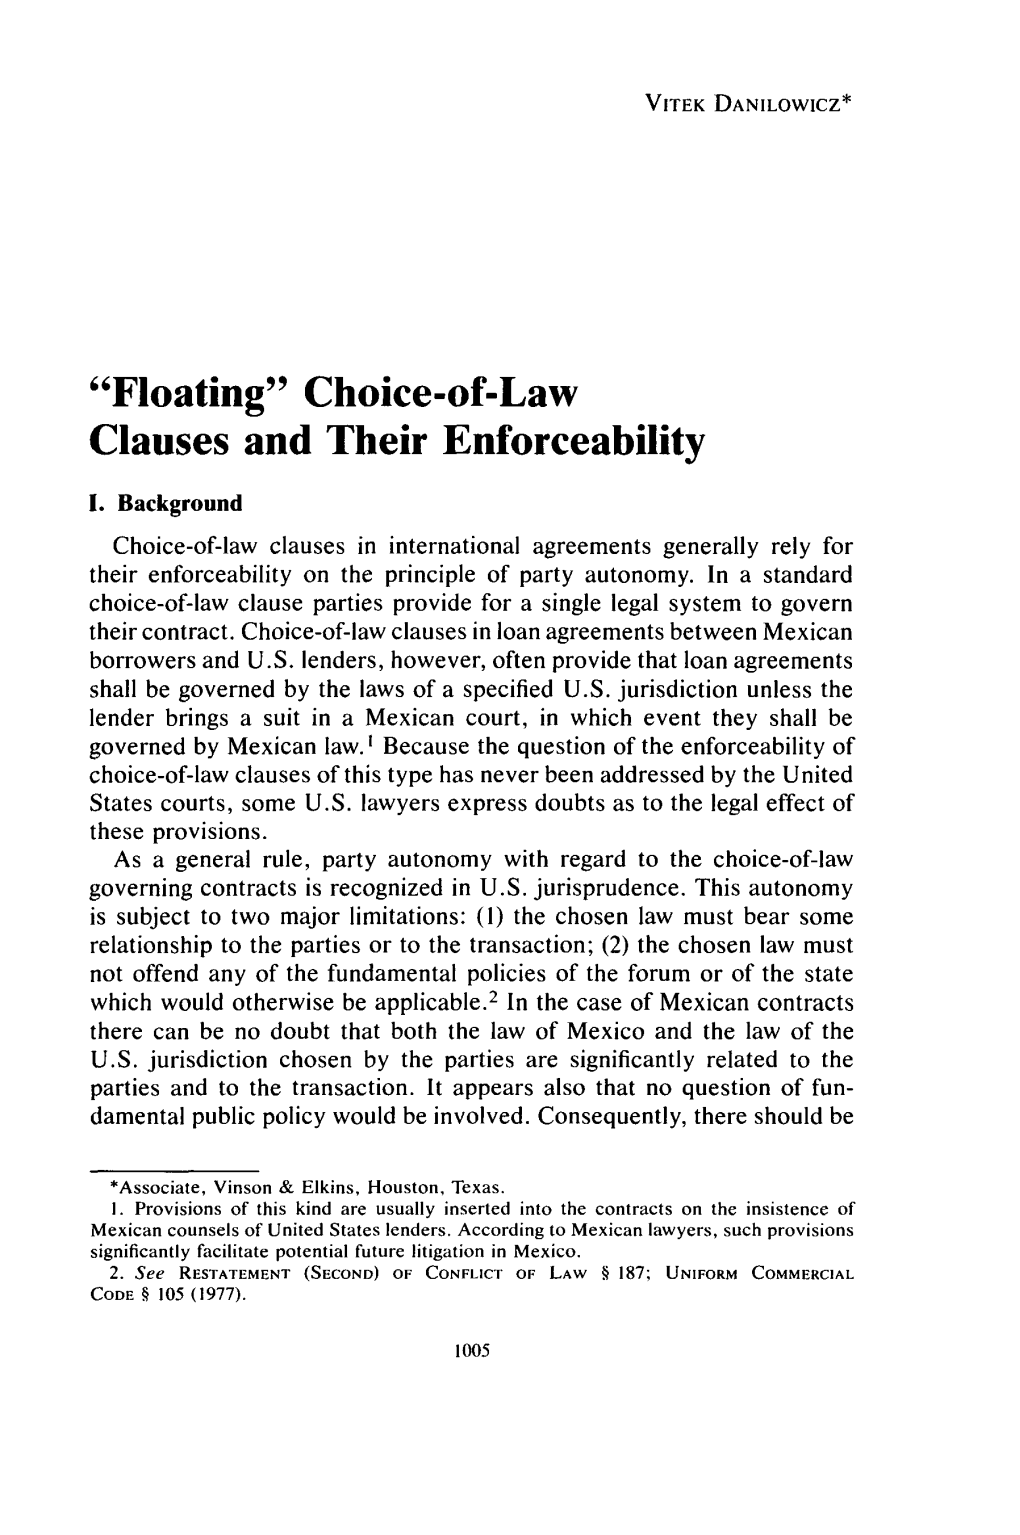 "Floating" Choice-Of-Law Clauses and Their Enforceability